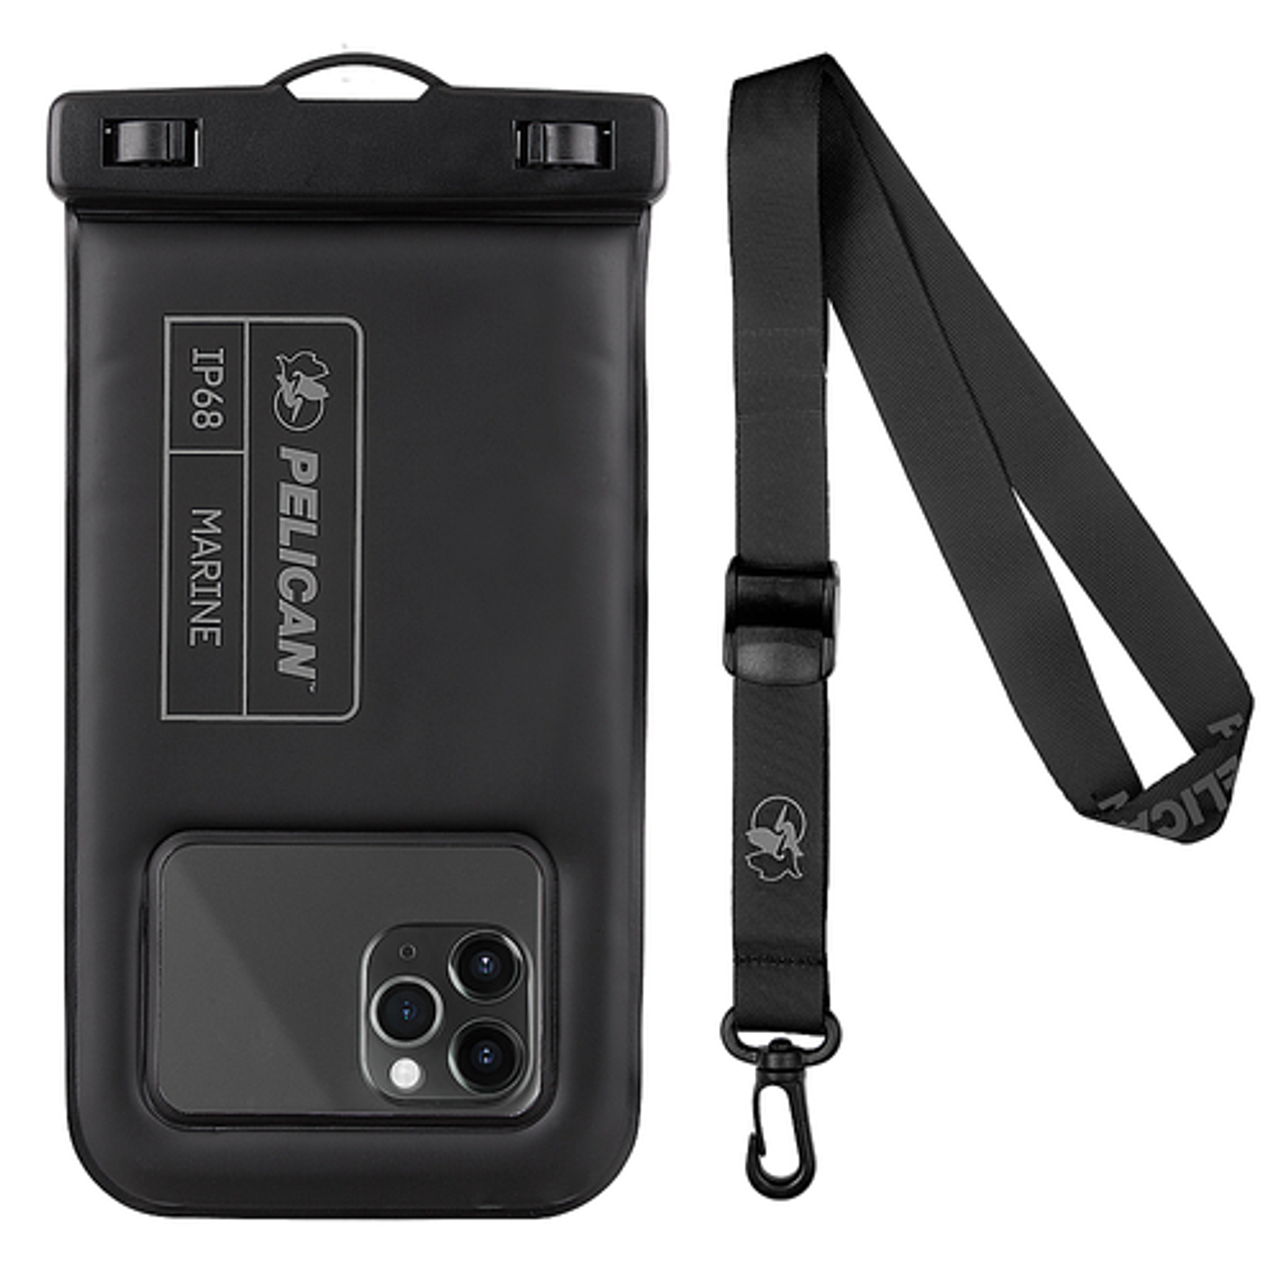 Pelican - Waterproof Floating Phone Pouch for Most Cell Phones - Stealth Black